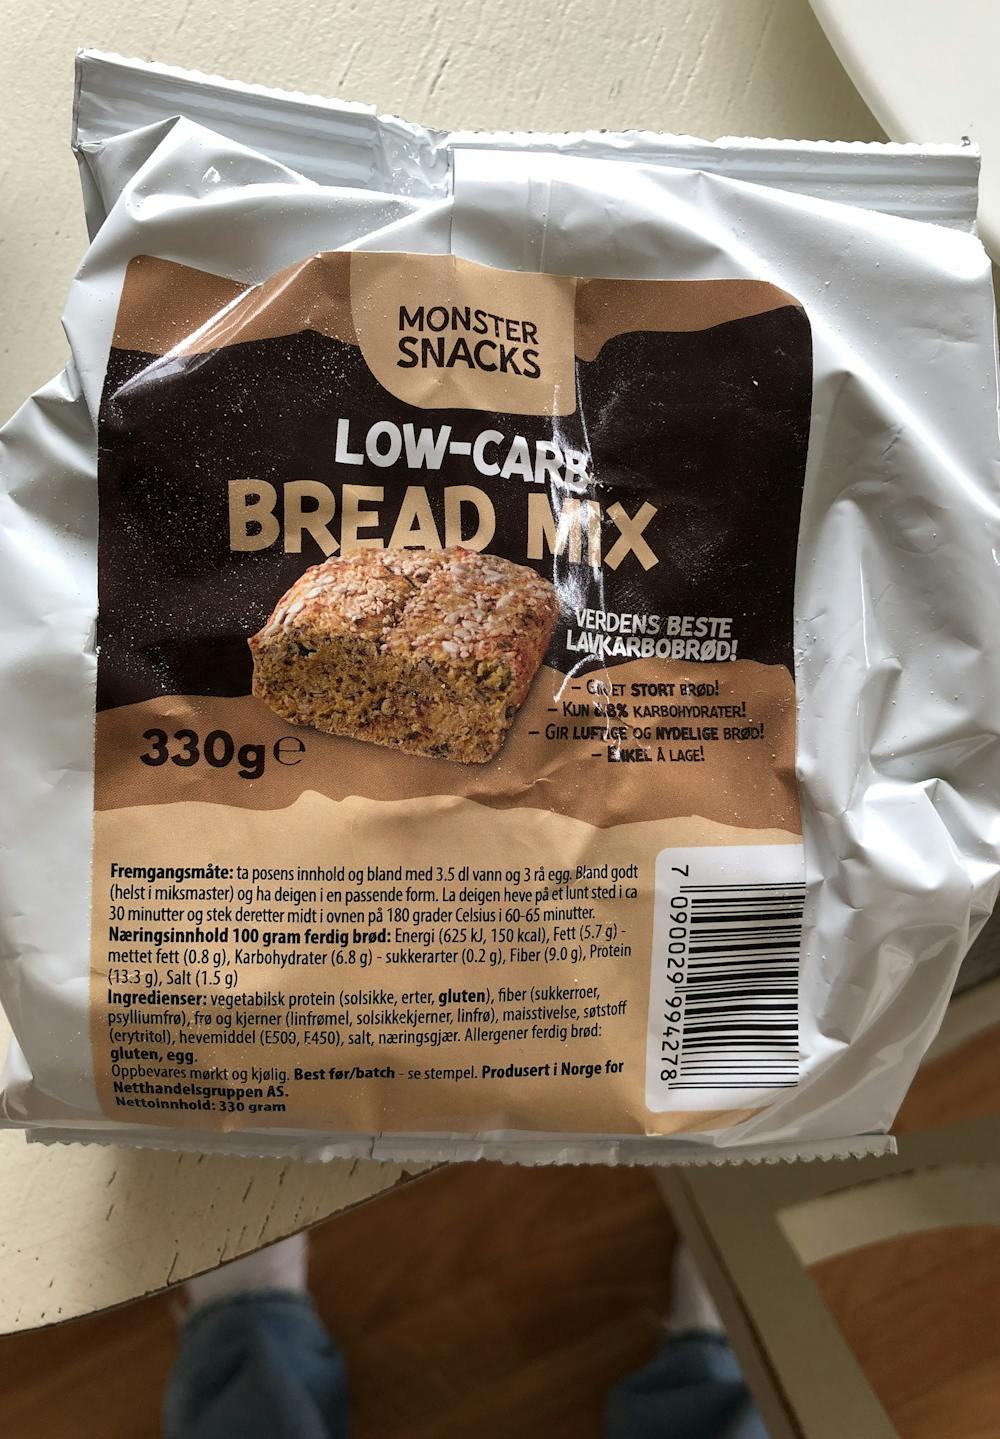 Low-Carb bread mix, Monster